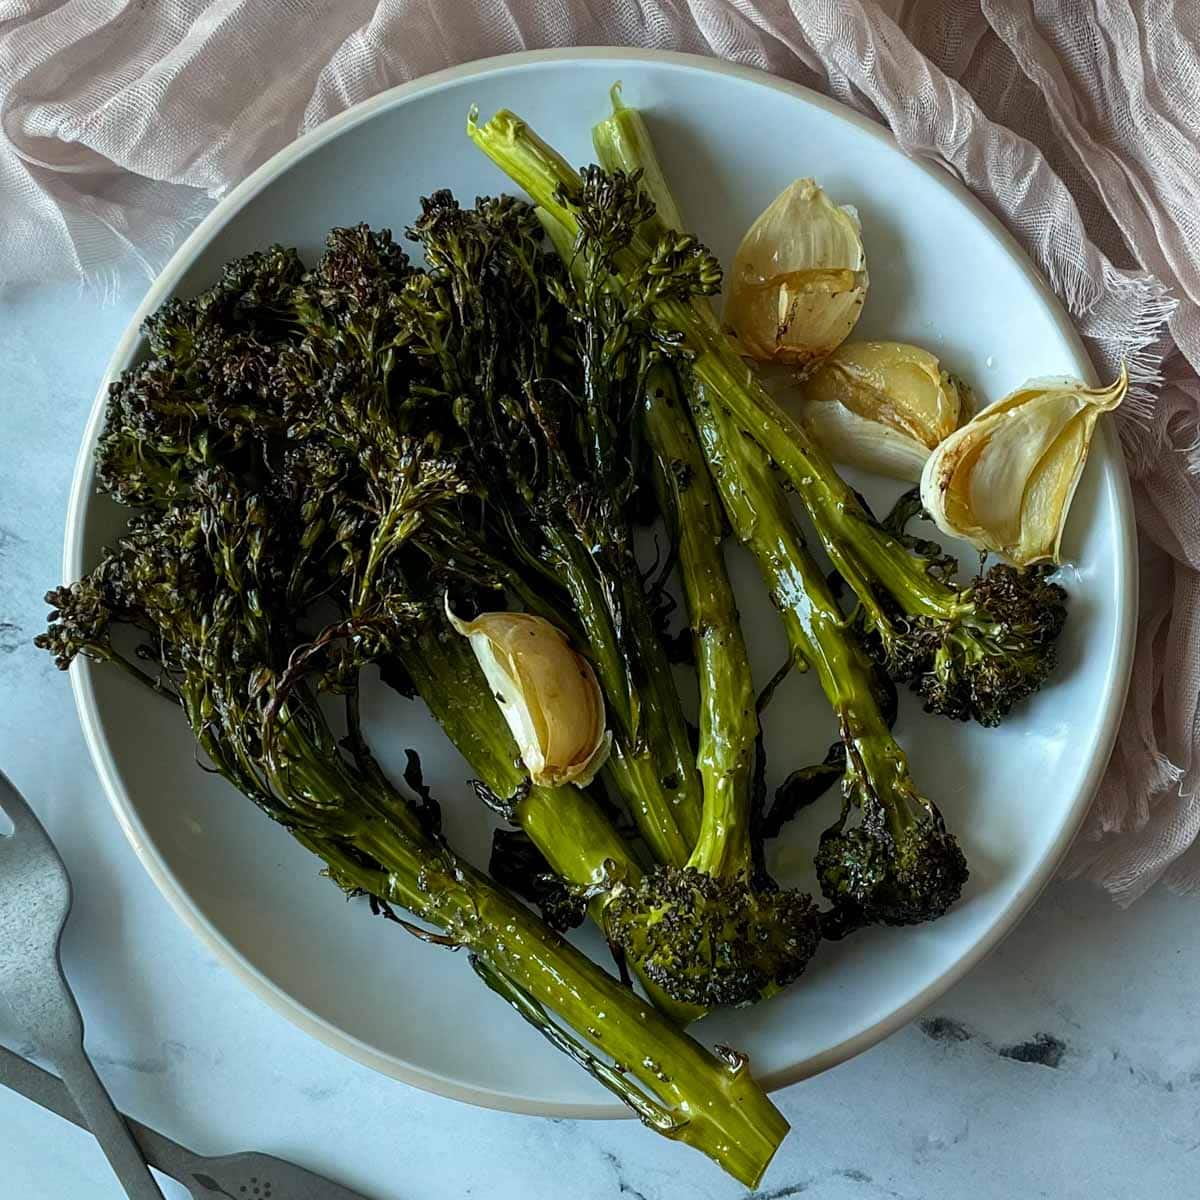 Roasted broccolini and garlic cloves are shown on a white plate with a light pink linen with two forks.